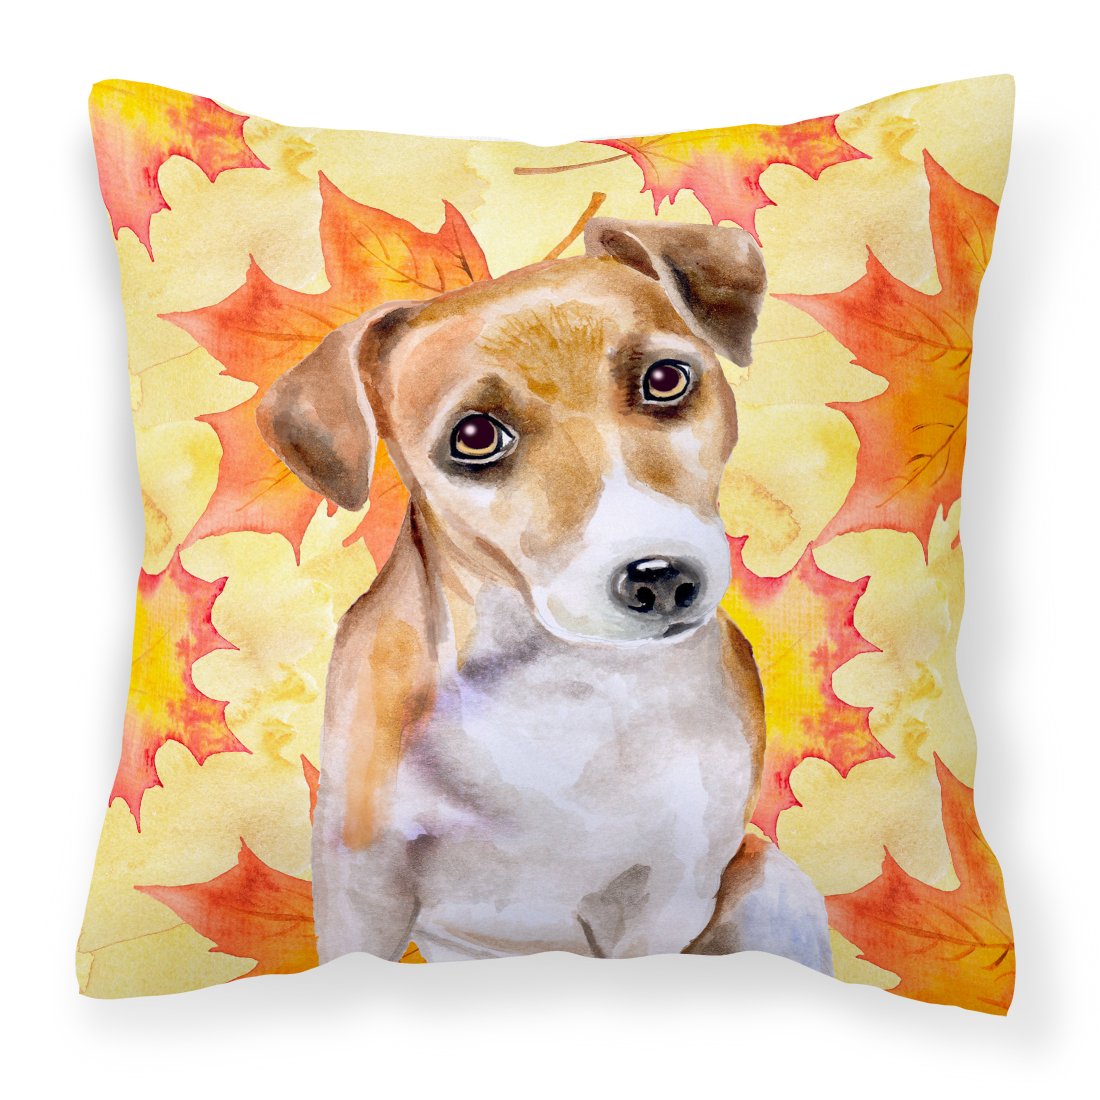 Jack Russell Terrier #2 Fall Fabric Decorative Pillow BB9974PW1818 by Caroline's Treasures